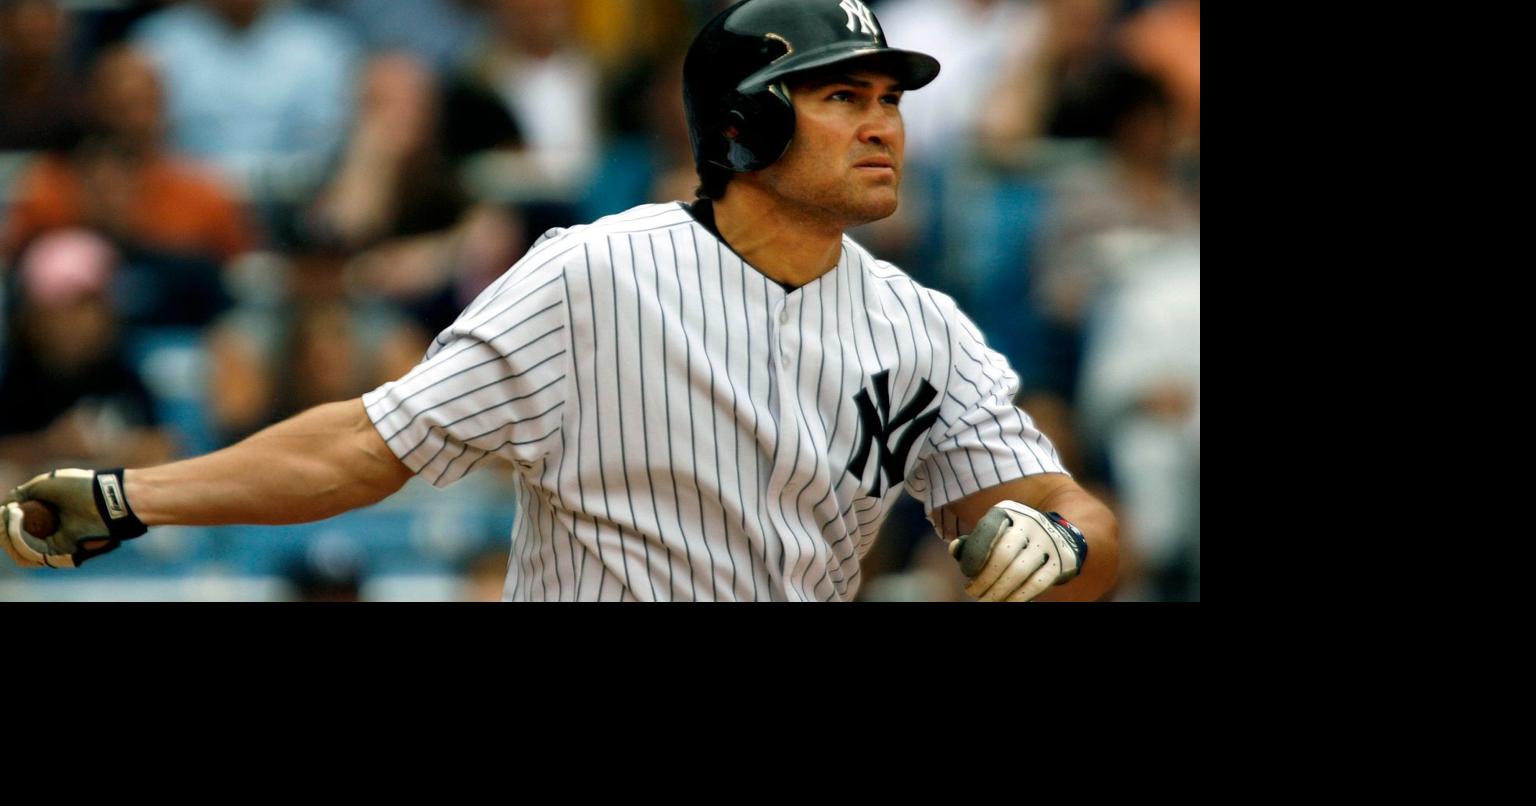 In return to the Bronx, ex-Yankee Johnny Damon hopes to hear cheers 